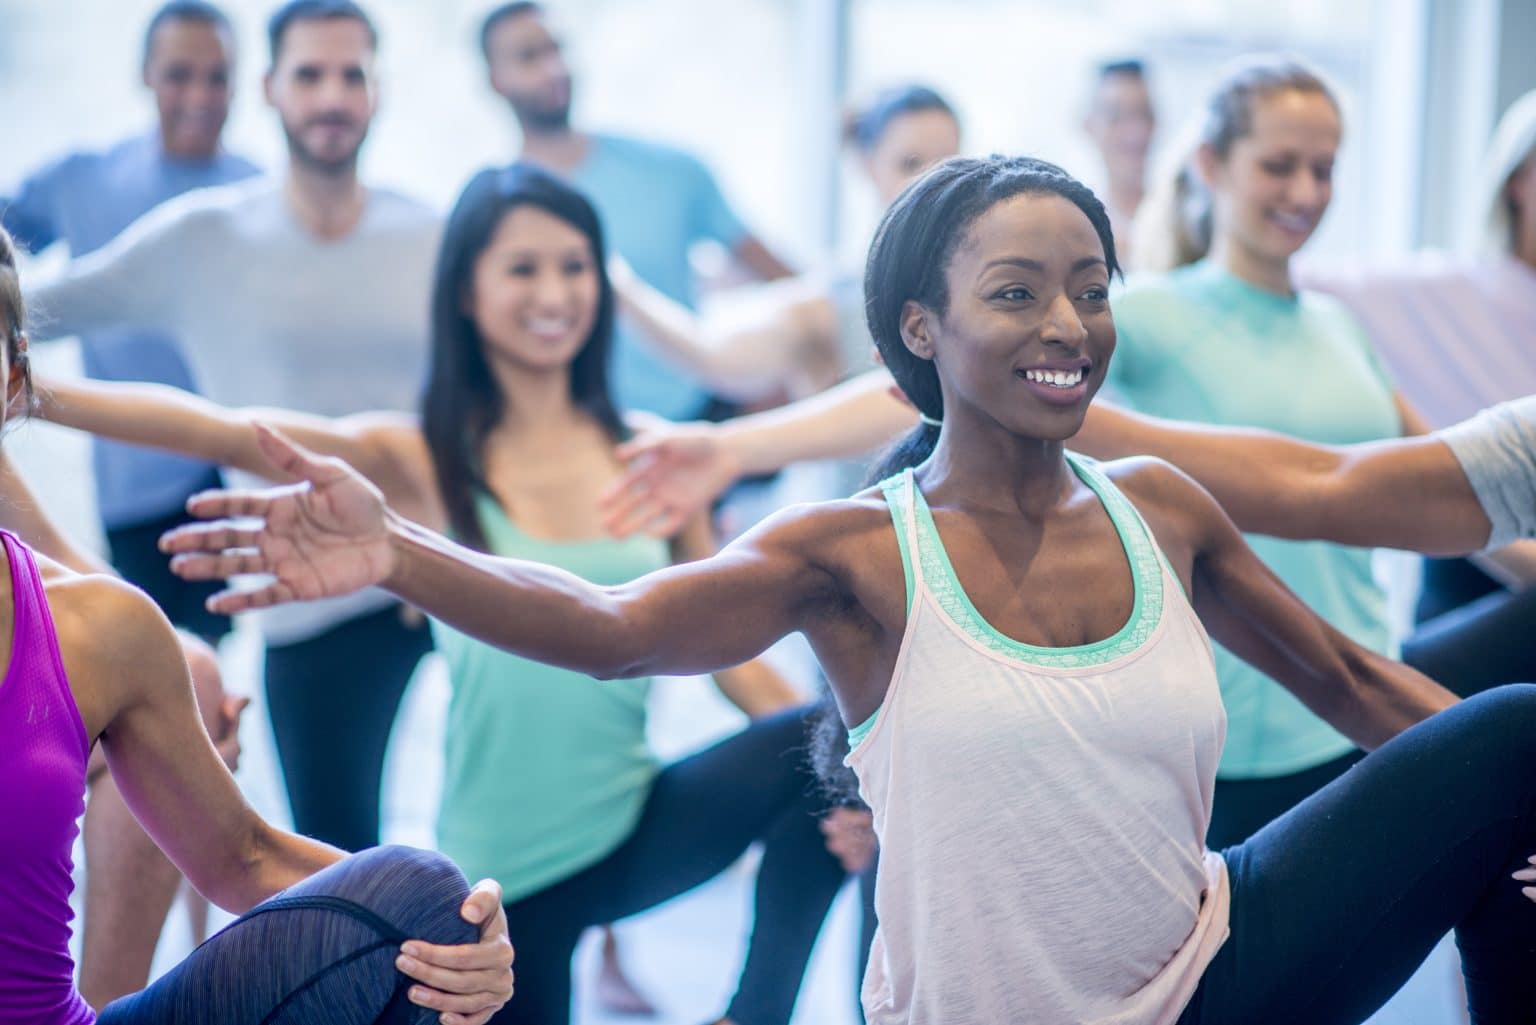 Woman smiling in an exercise class with arm outstretched. She is balancing in a group class with men and woman. She is holding her knee with her hand. 